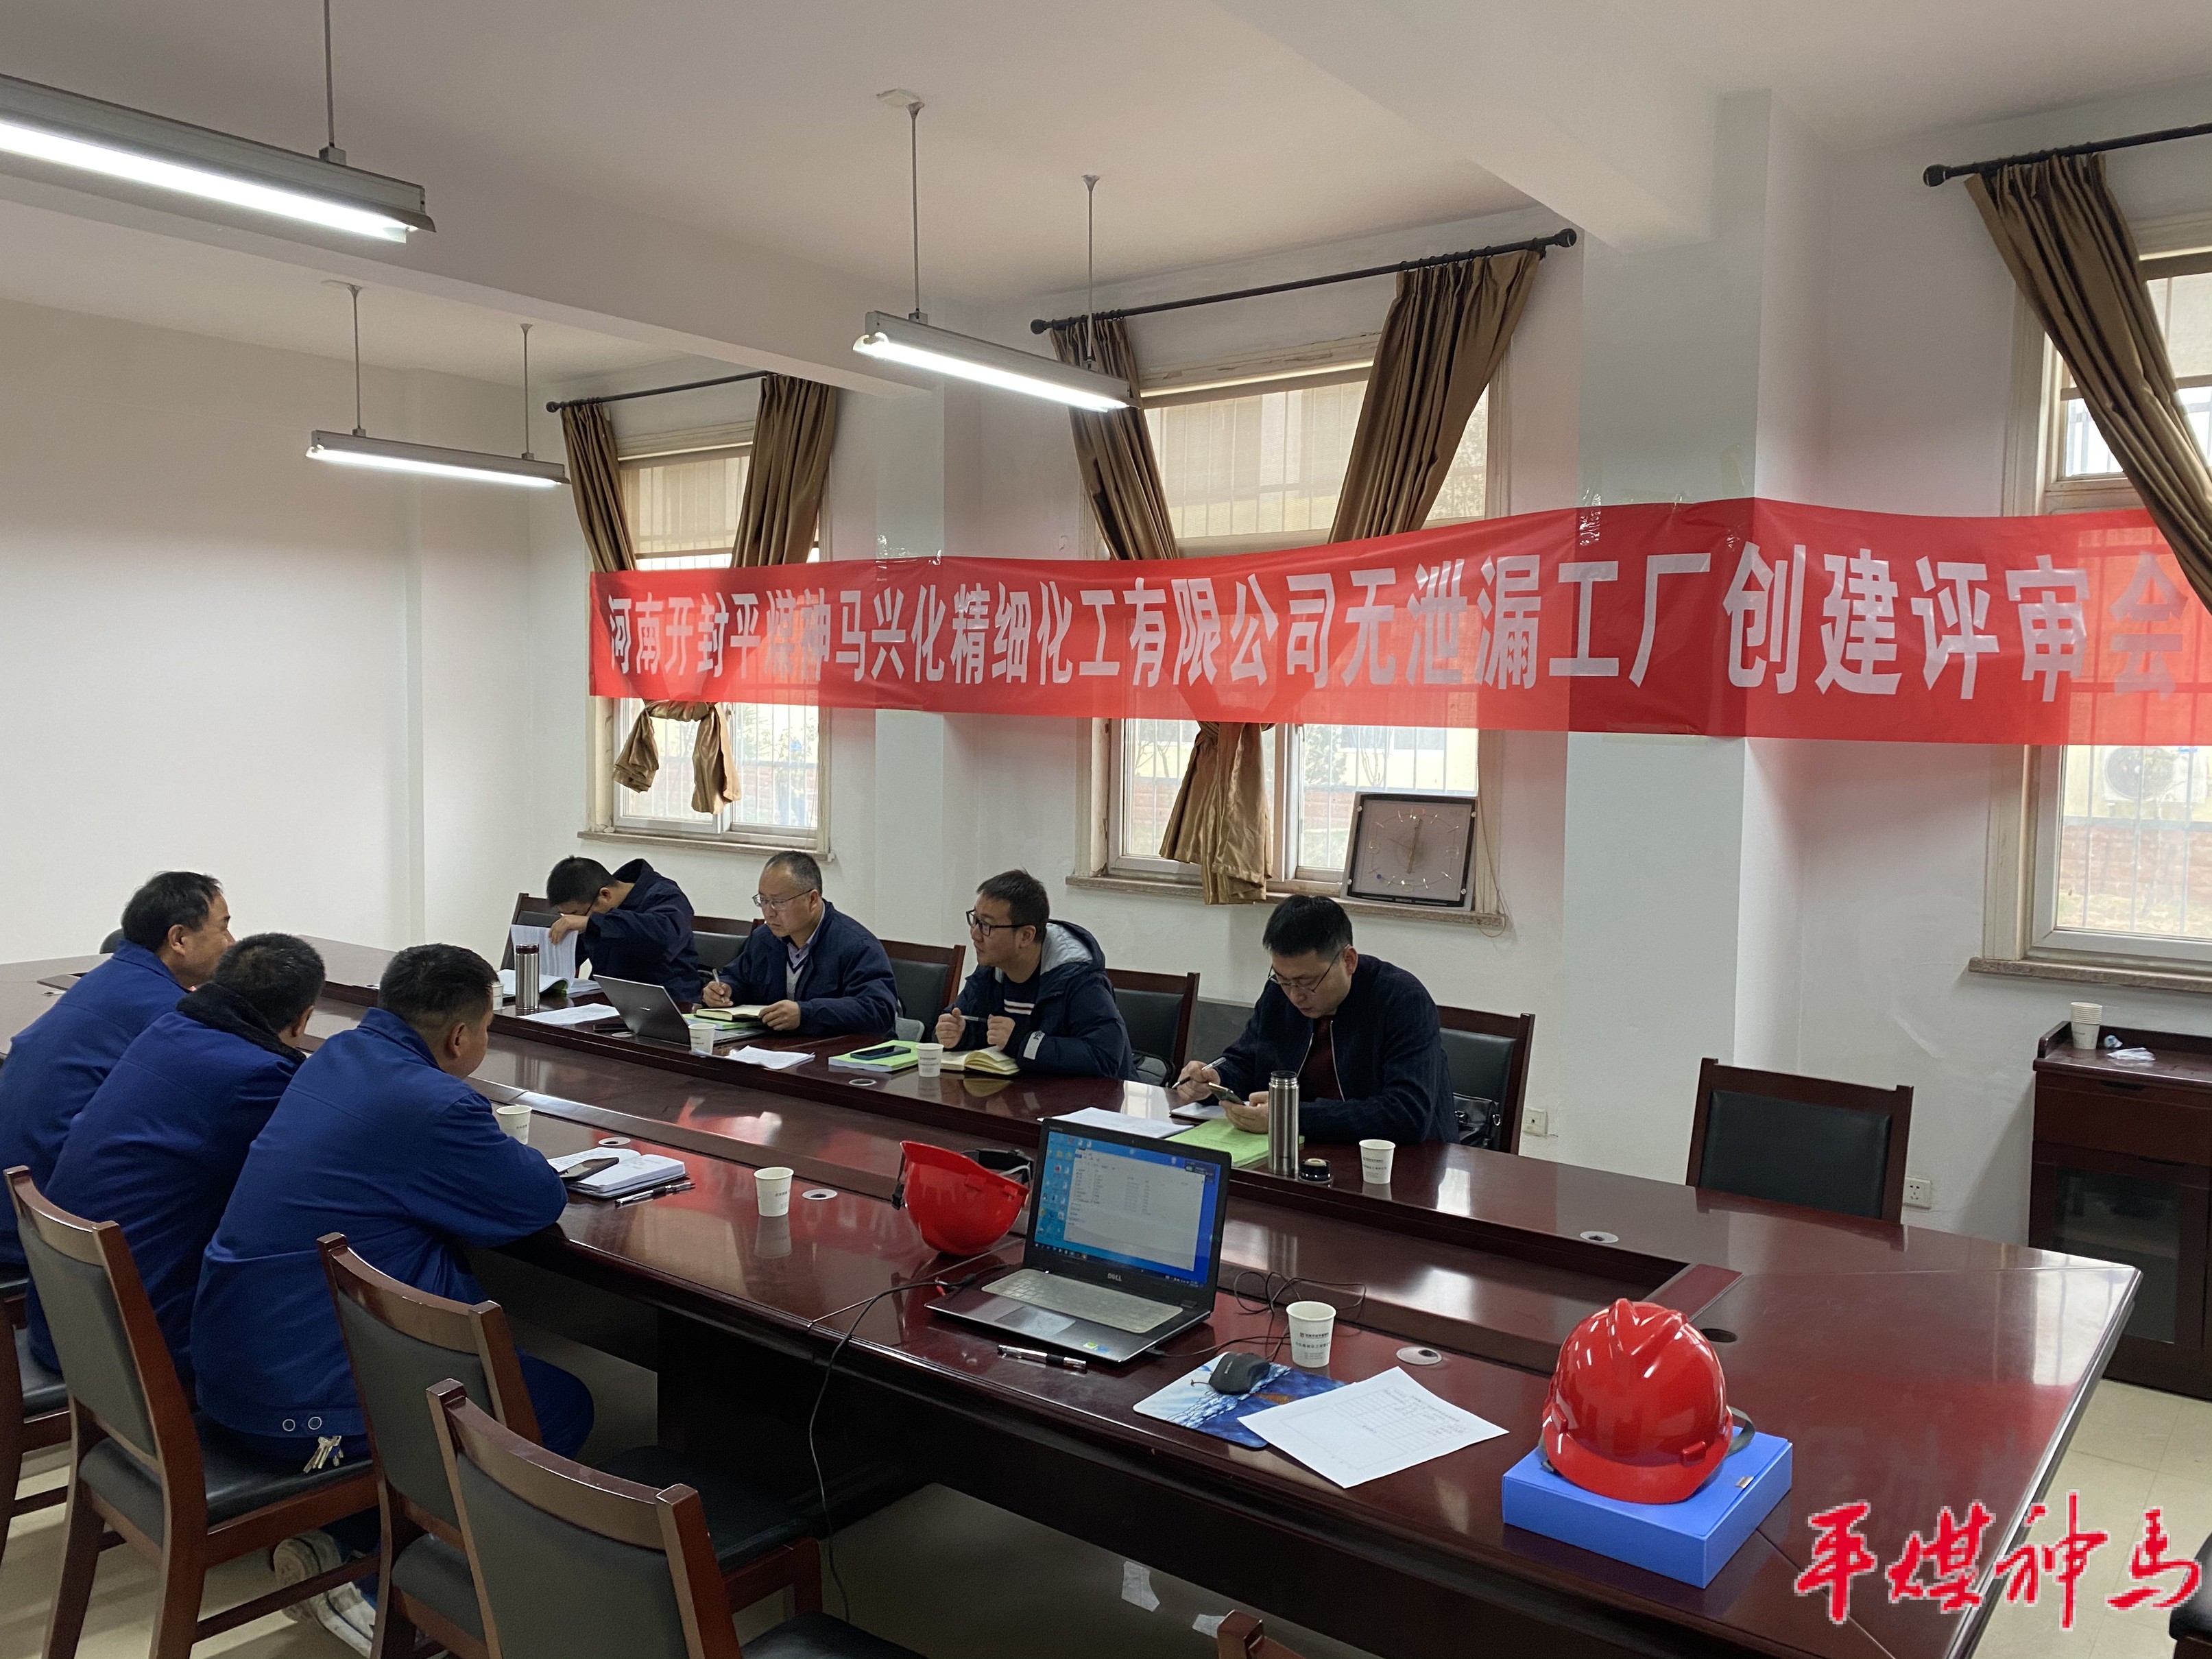 Kaifeng Xinghua Co., Ltd. successfully passed the acceptance inspection of Henan Province "Non-